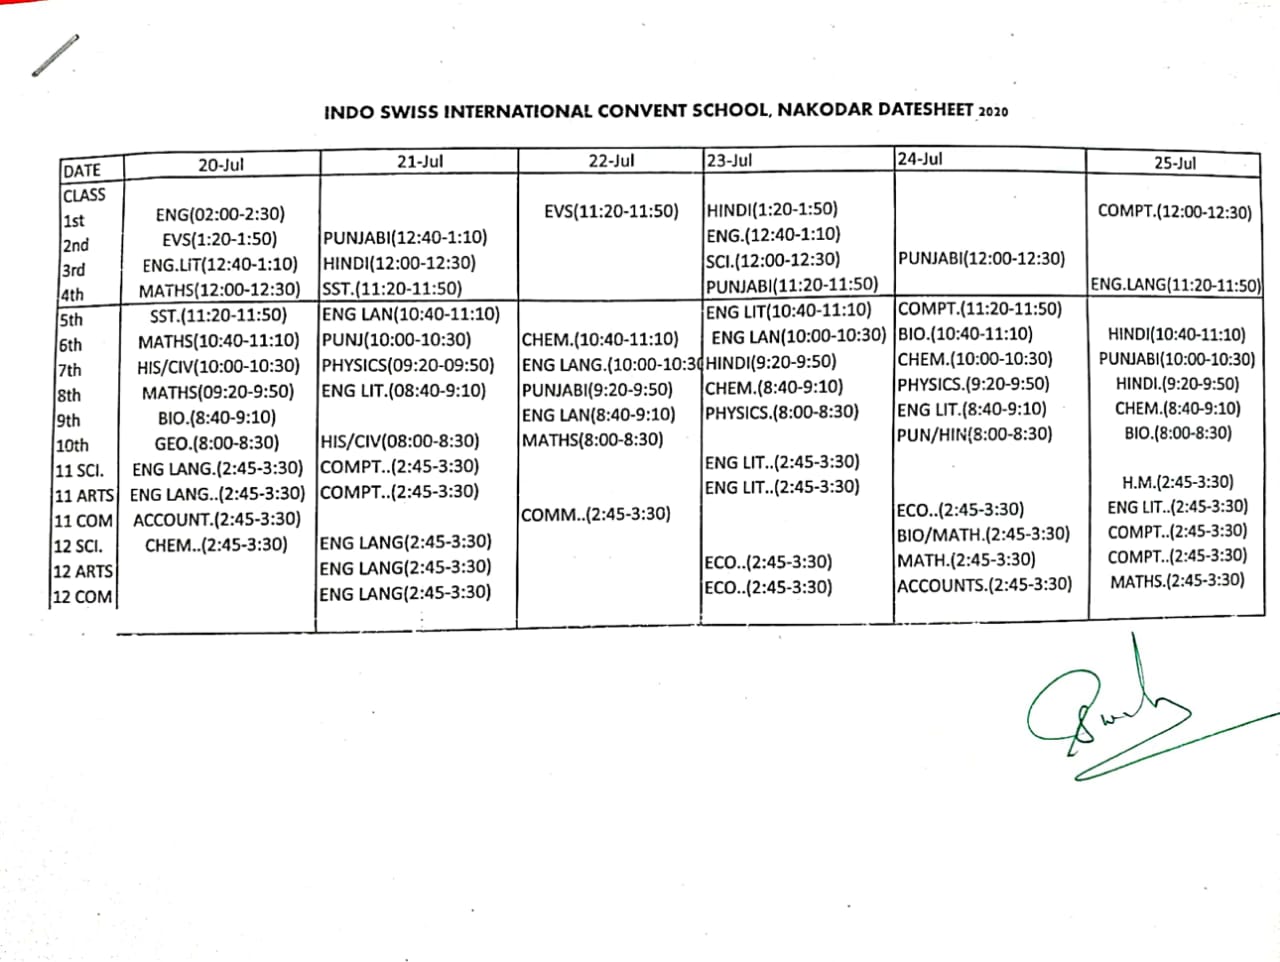 Datesheet with timings subjectwise.(Class I TO XII)